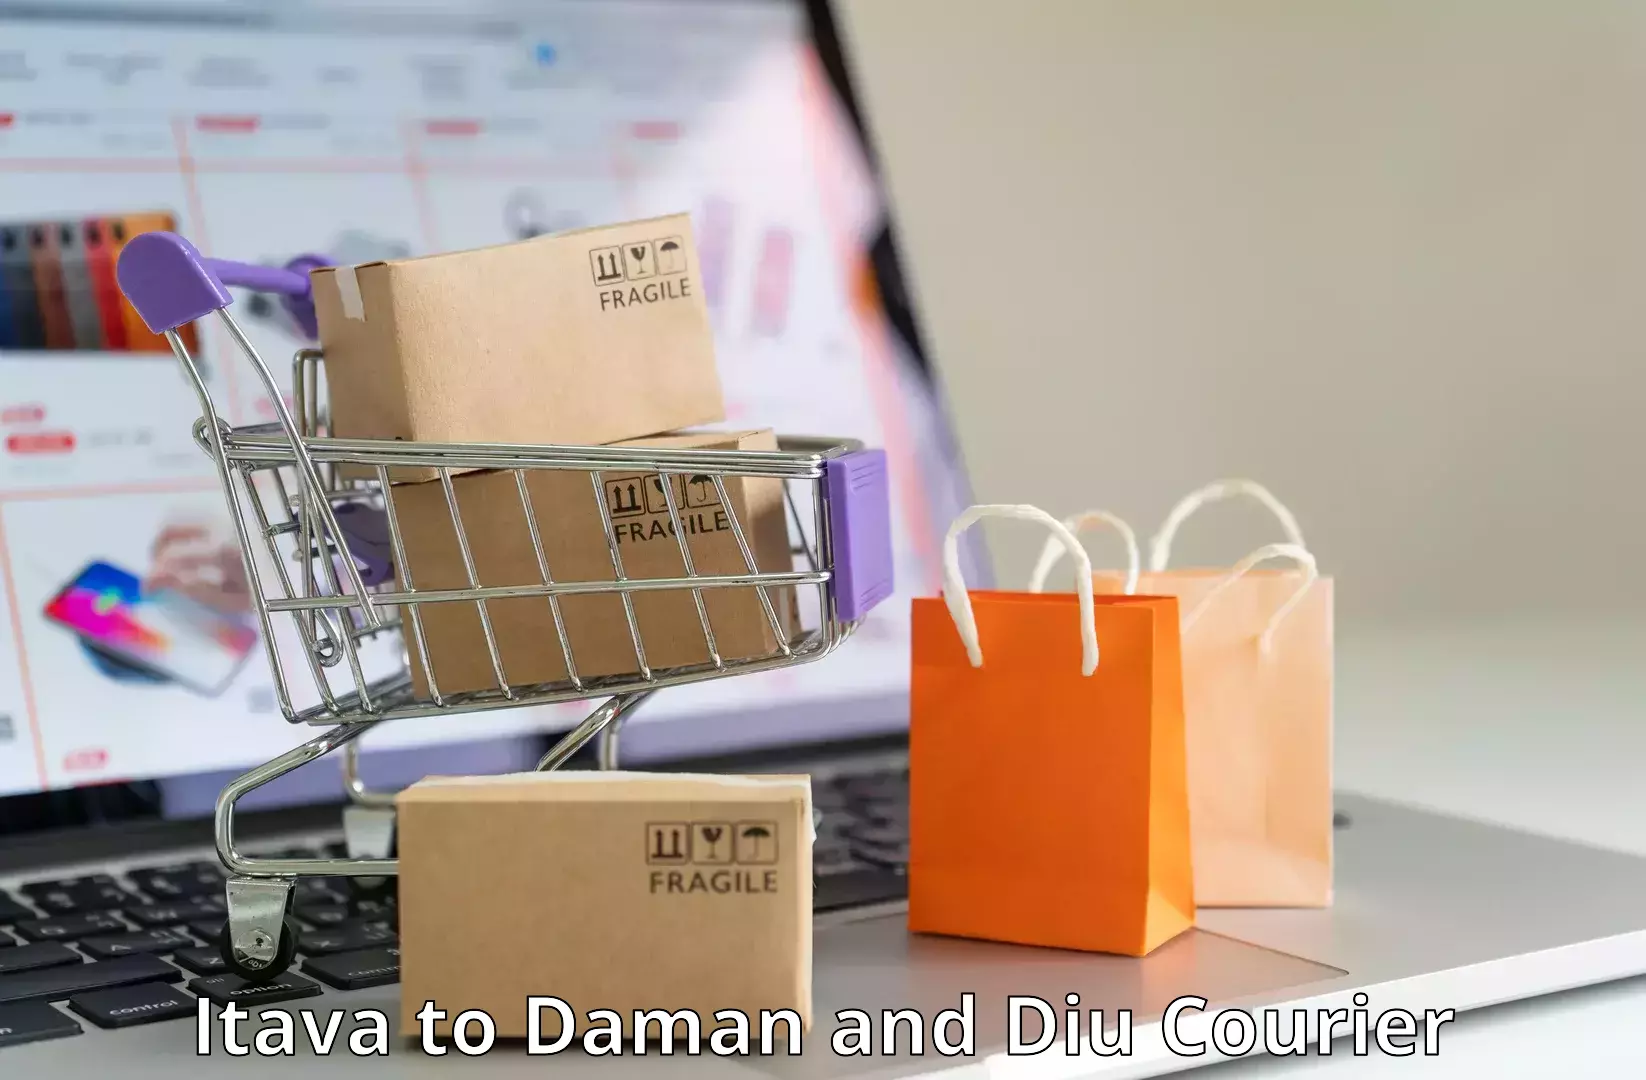 Automated parcel services Itava to Daman and Diu